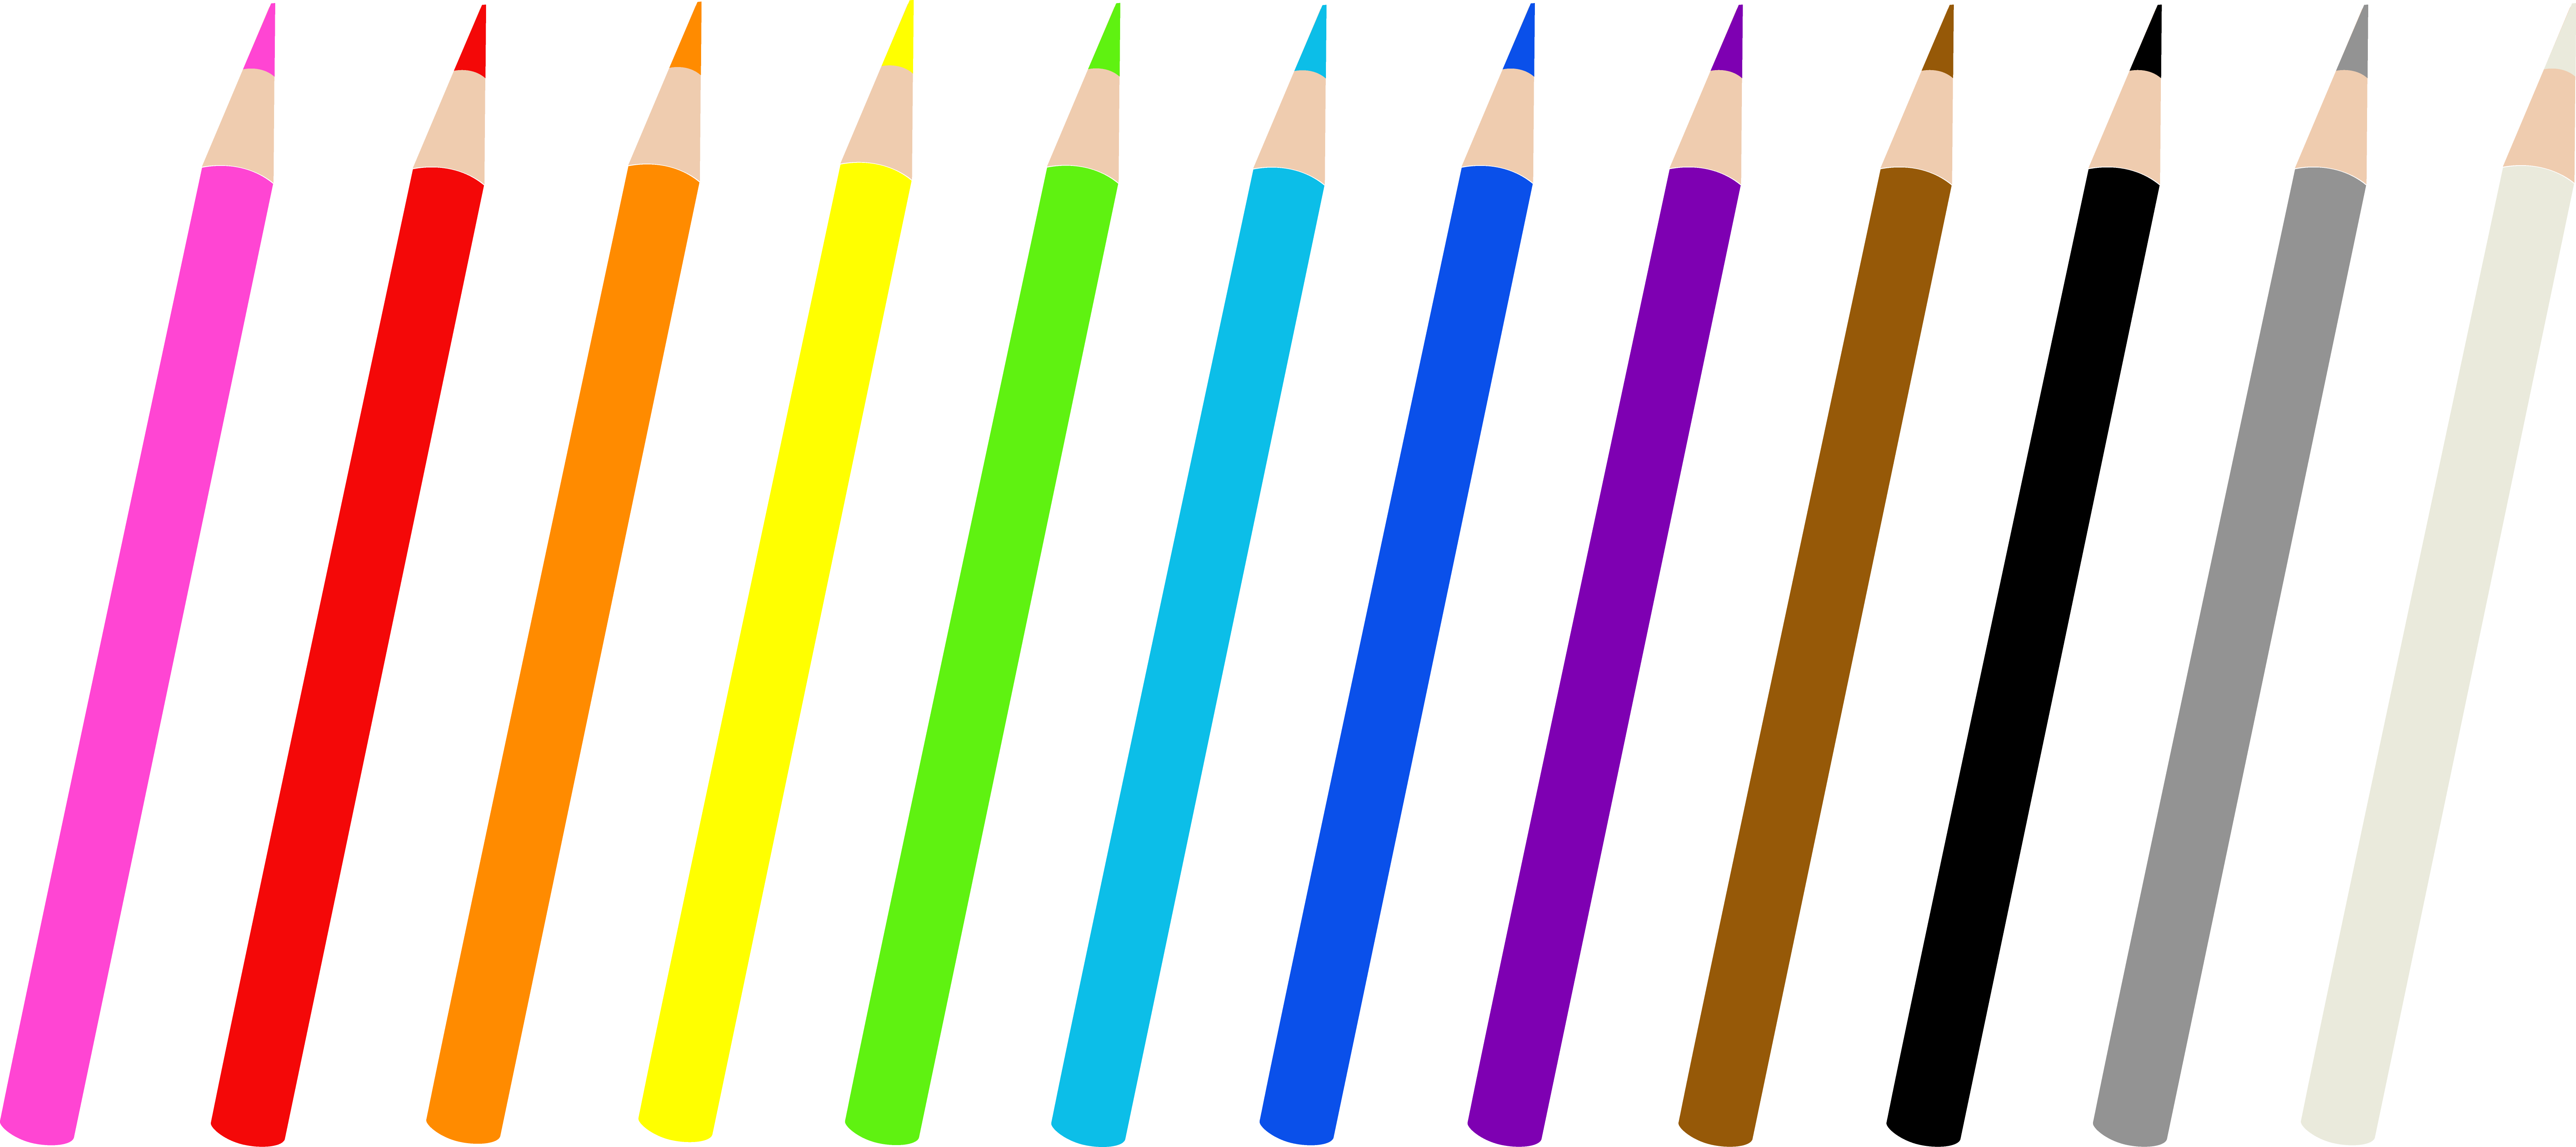 Colored Pencils Drawings   Clipart Panda   Free Clipart Images